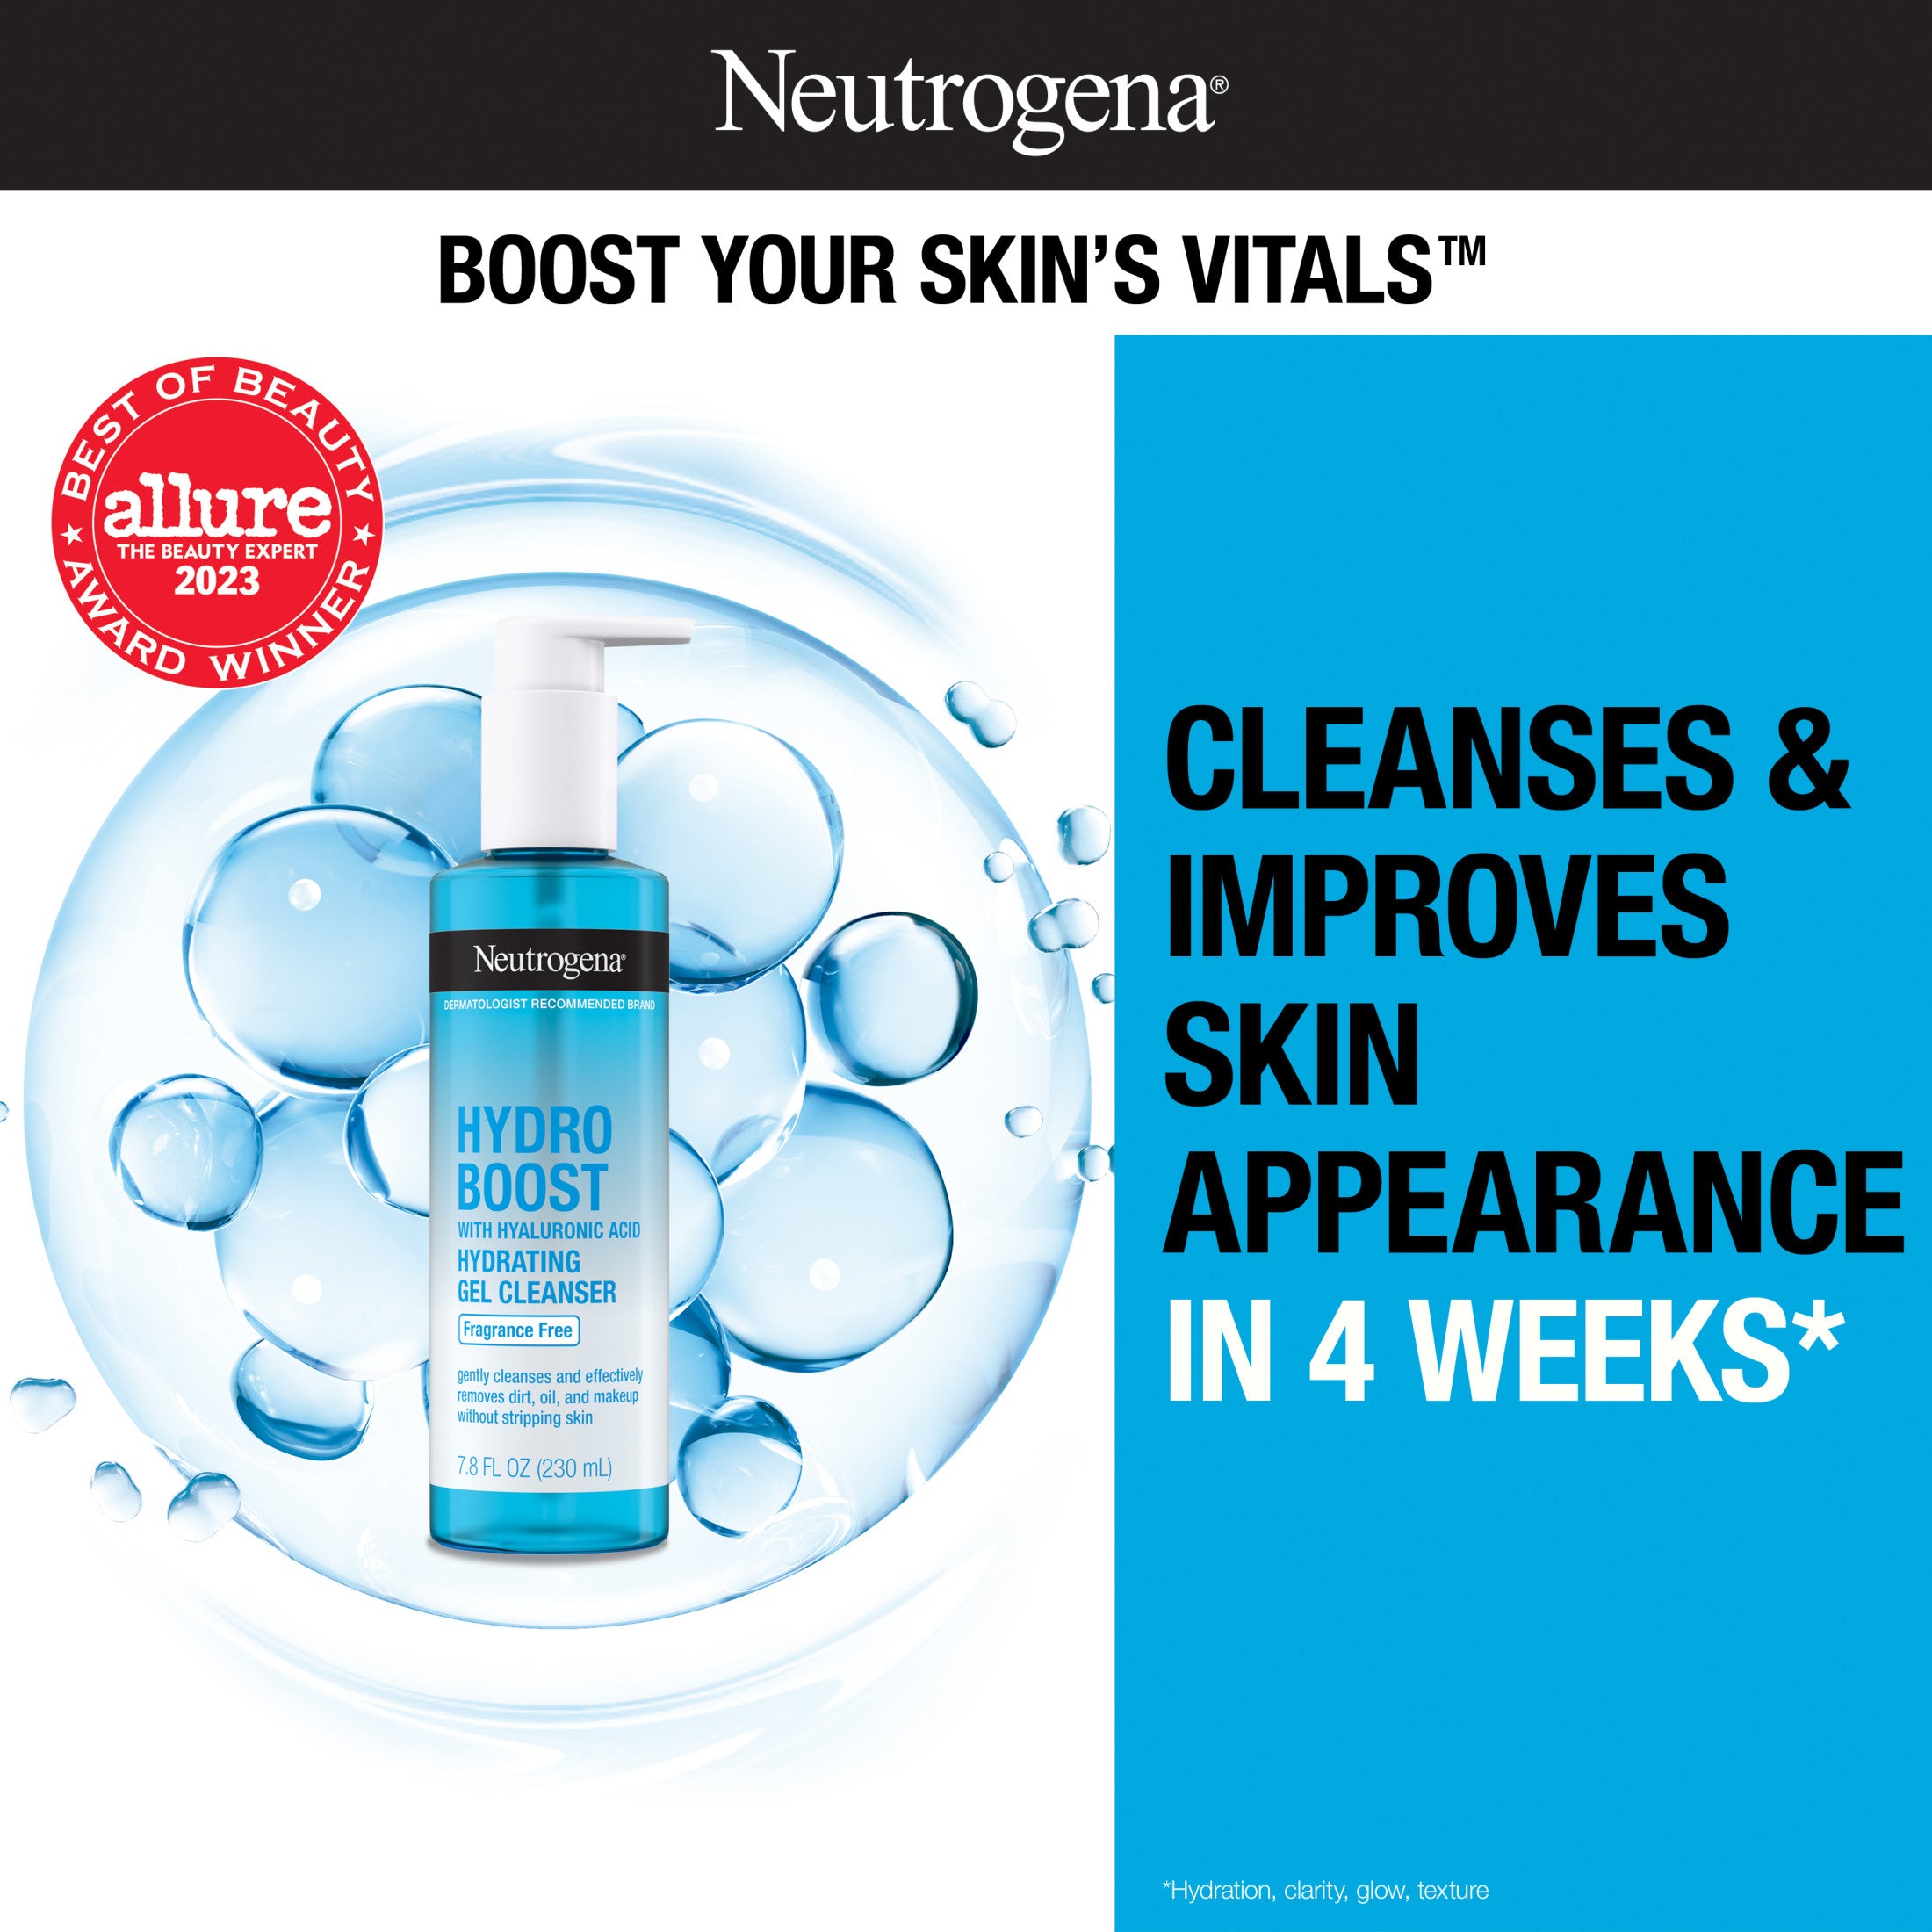 Neutrogena Hydro Boost Hyaluronic Acid Gel Facial Cleanser and Face Wash, Fragrance-Free, 7.8 oz | MTTS279